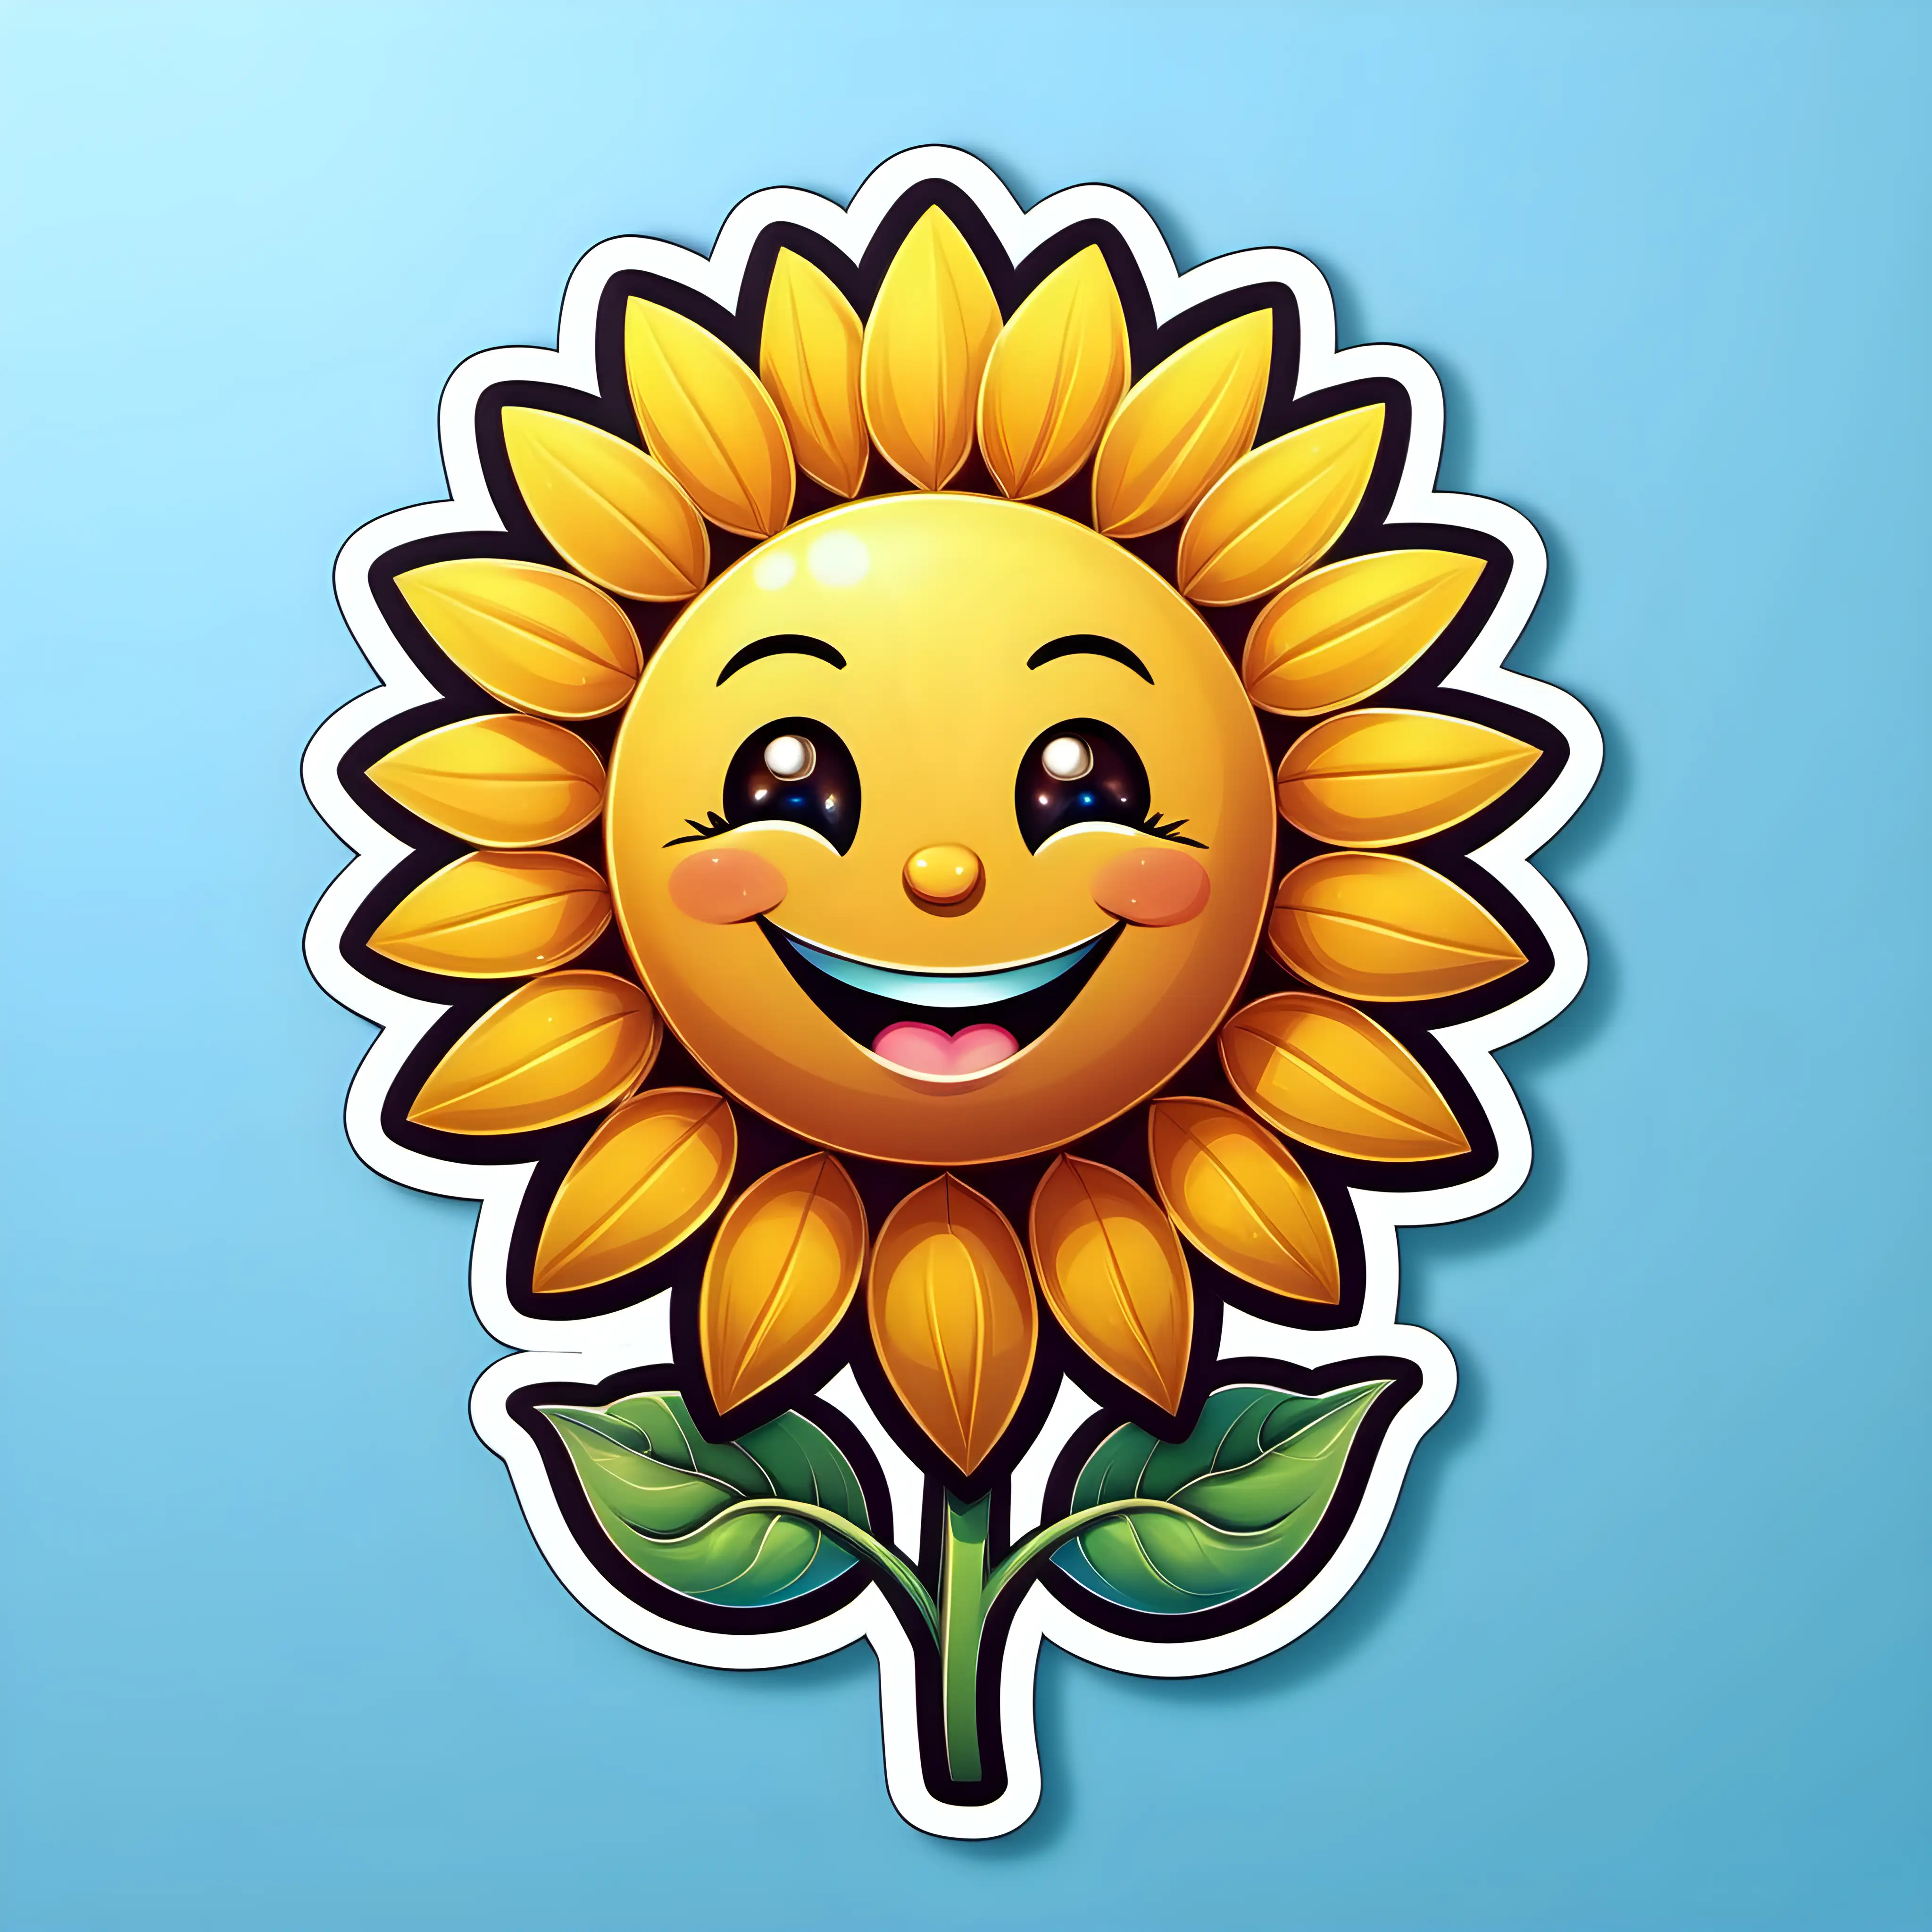 Smiling Cute Sunflower Sticker on Sky Blue Background Ultra Detailed Floral Art